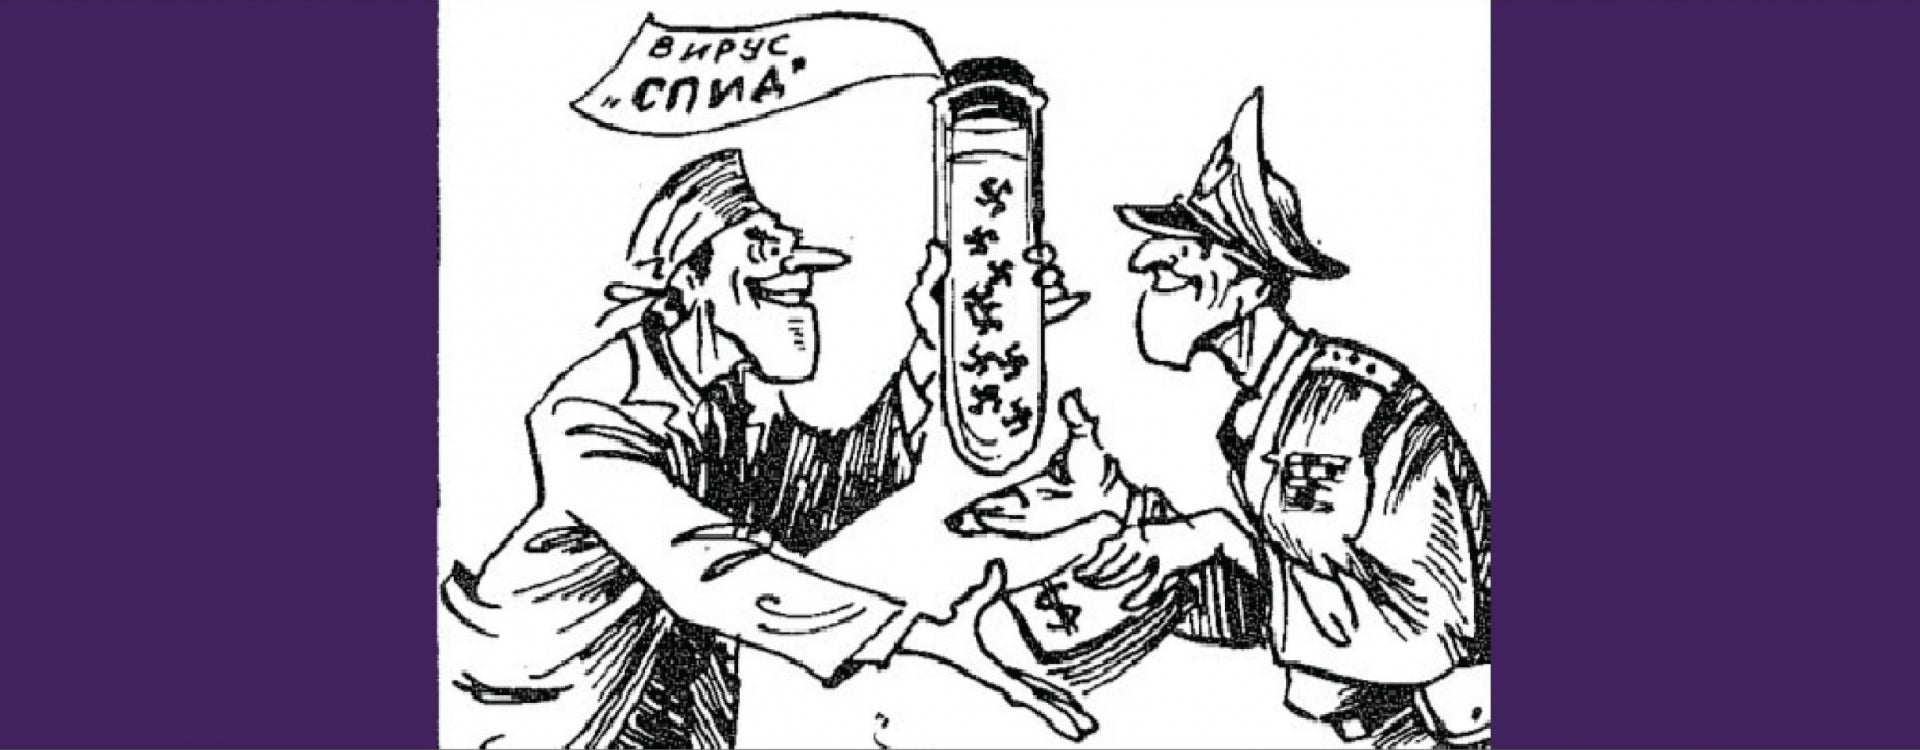 Cartoon published in Pravda, October 31, 1986, alleging that AIDS was the work of American biological warfare researchers.
Reproduced in: Geissler, Erhard and Robert Hunt Sprinkle. “Disinformation Squared: Was the HIV-from-Fort-Detrick Myth a Stasi Success?”
Politics and the Life Sciences: e Journal of the Association for Politics and the Life Sciences 32 2 (2013): 2-99. P.27. DOI:10.2990/32_2_2